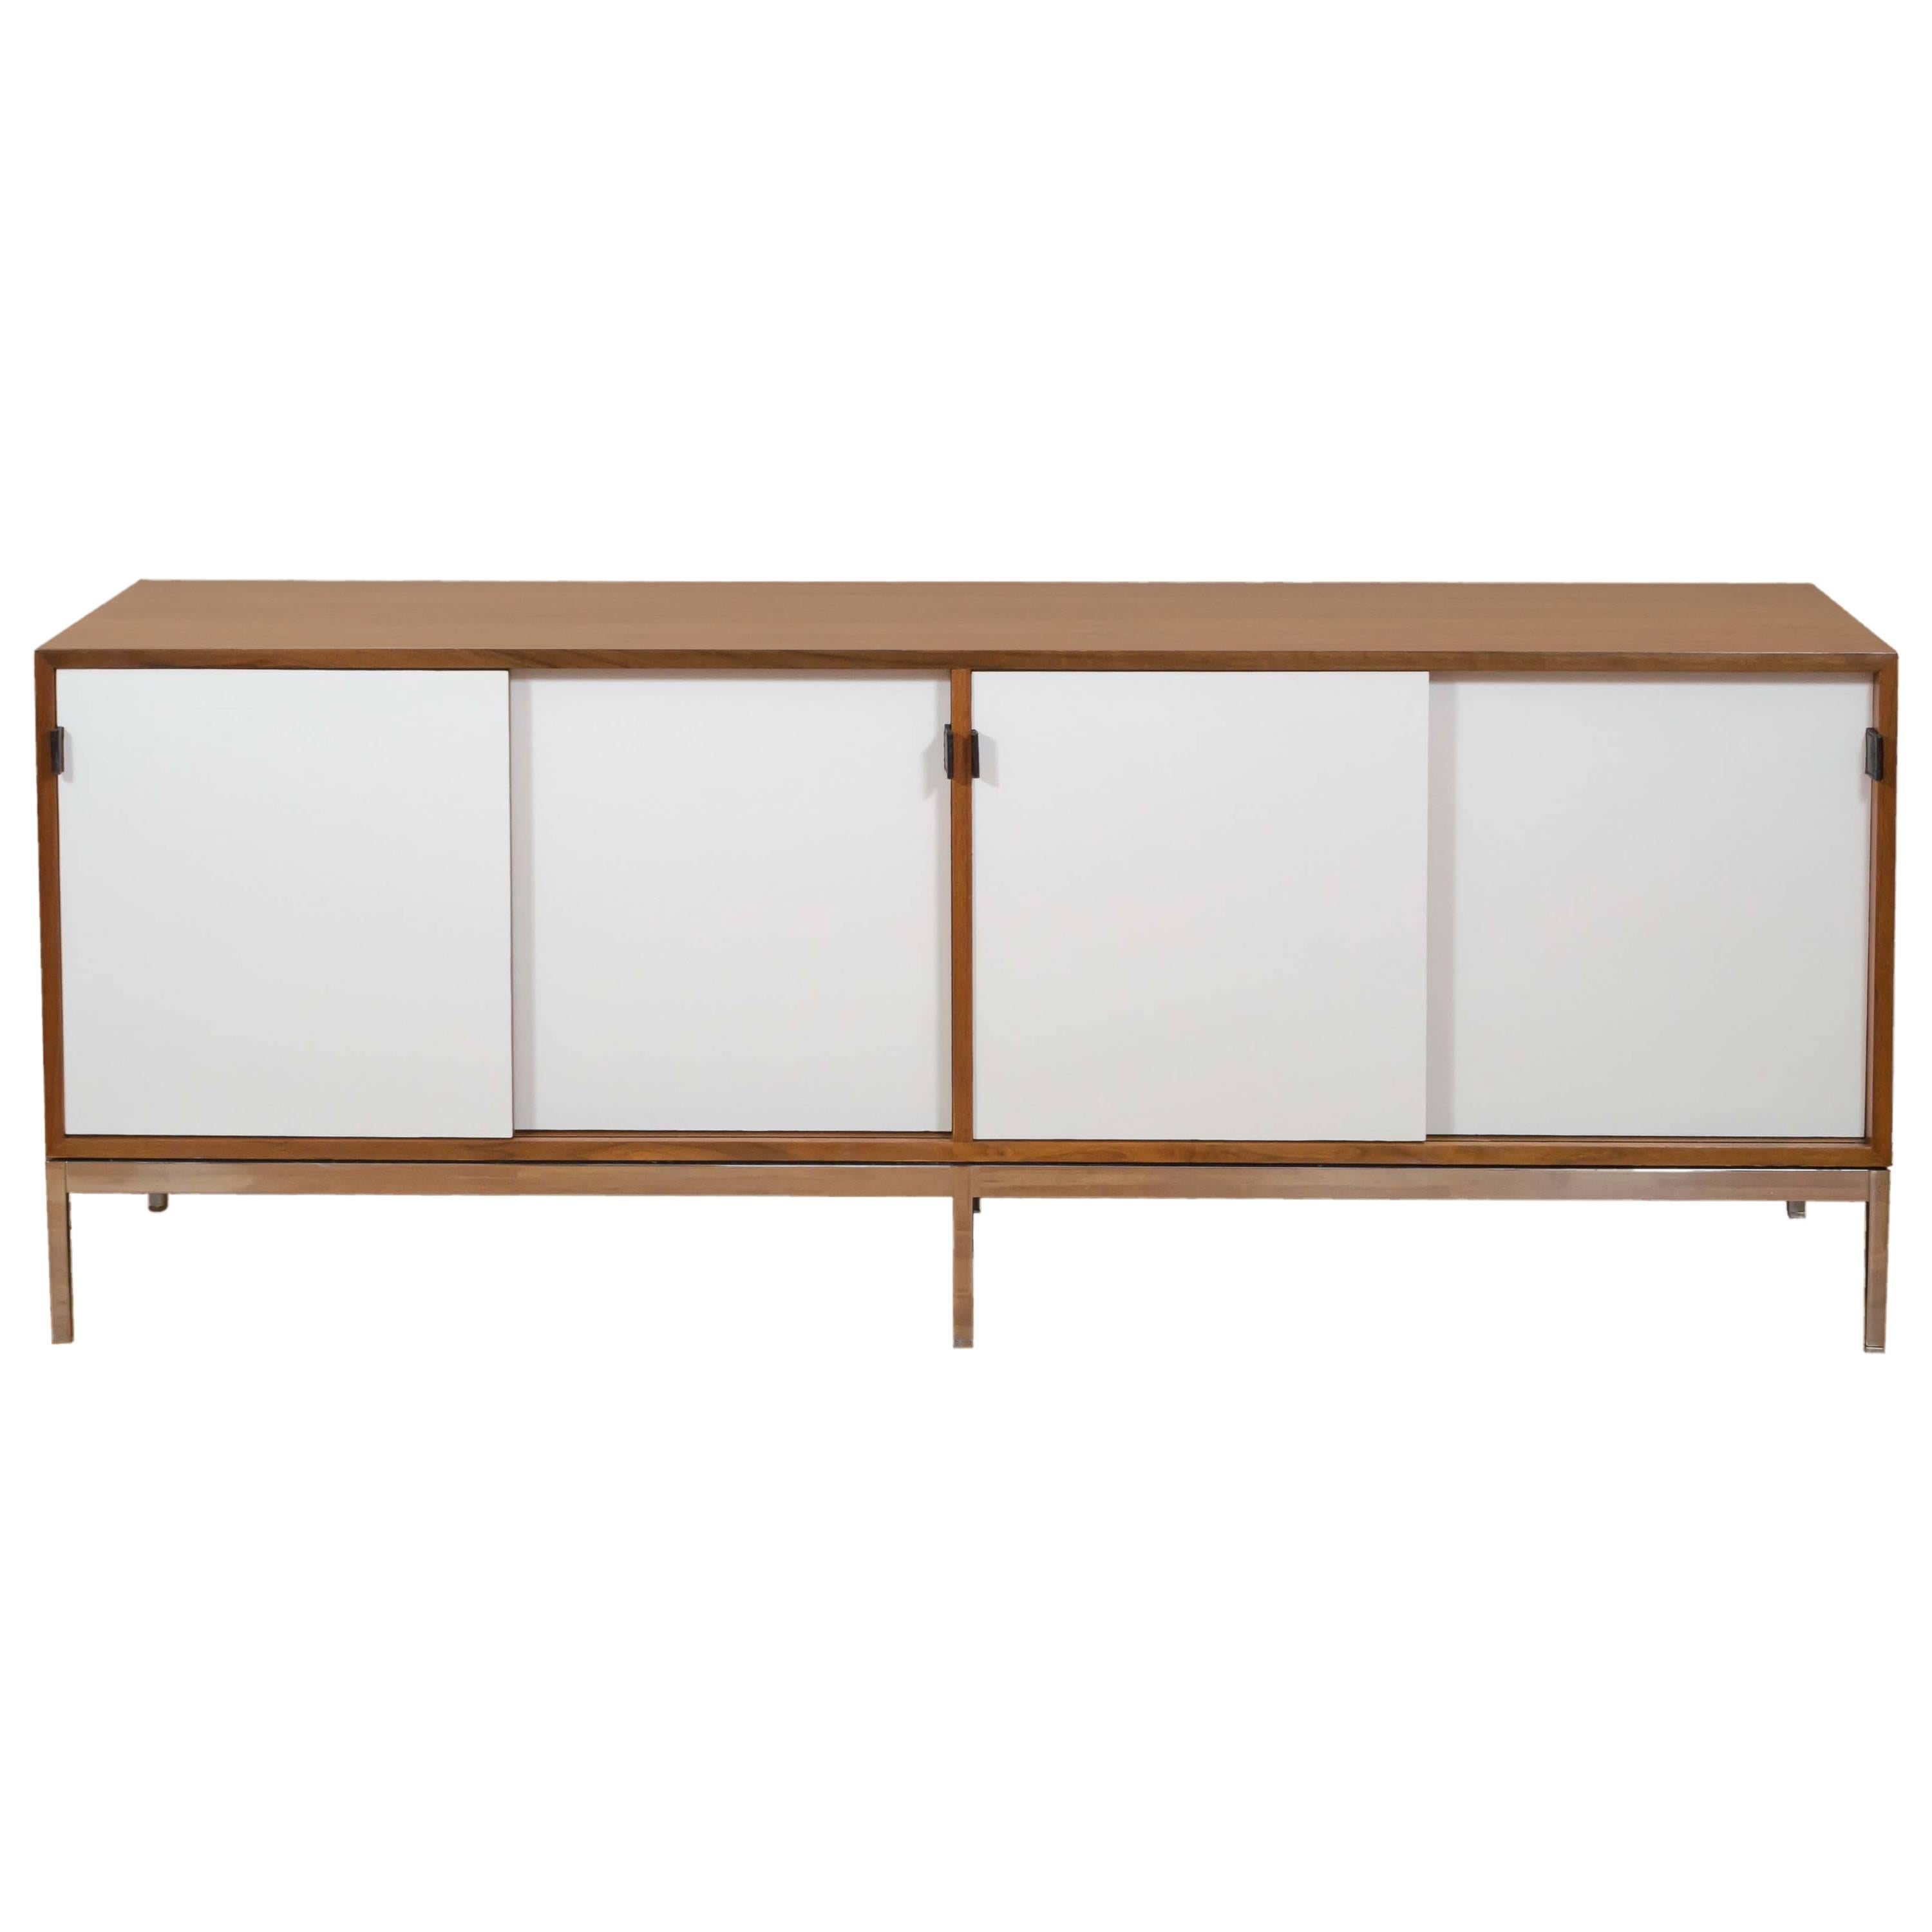 Florence Knoll for Knoll Associates Four-Door Walnut and Laminate Credenza